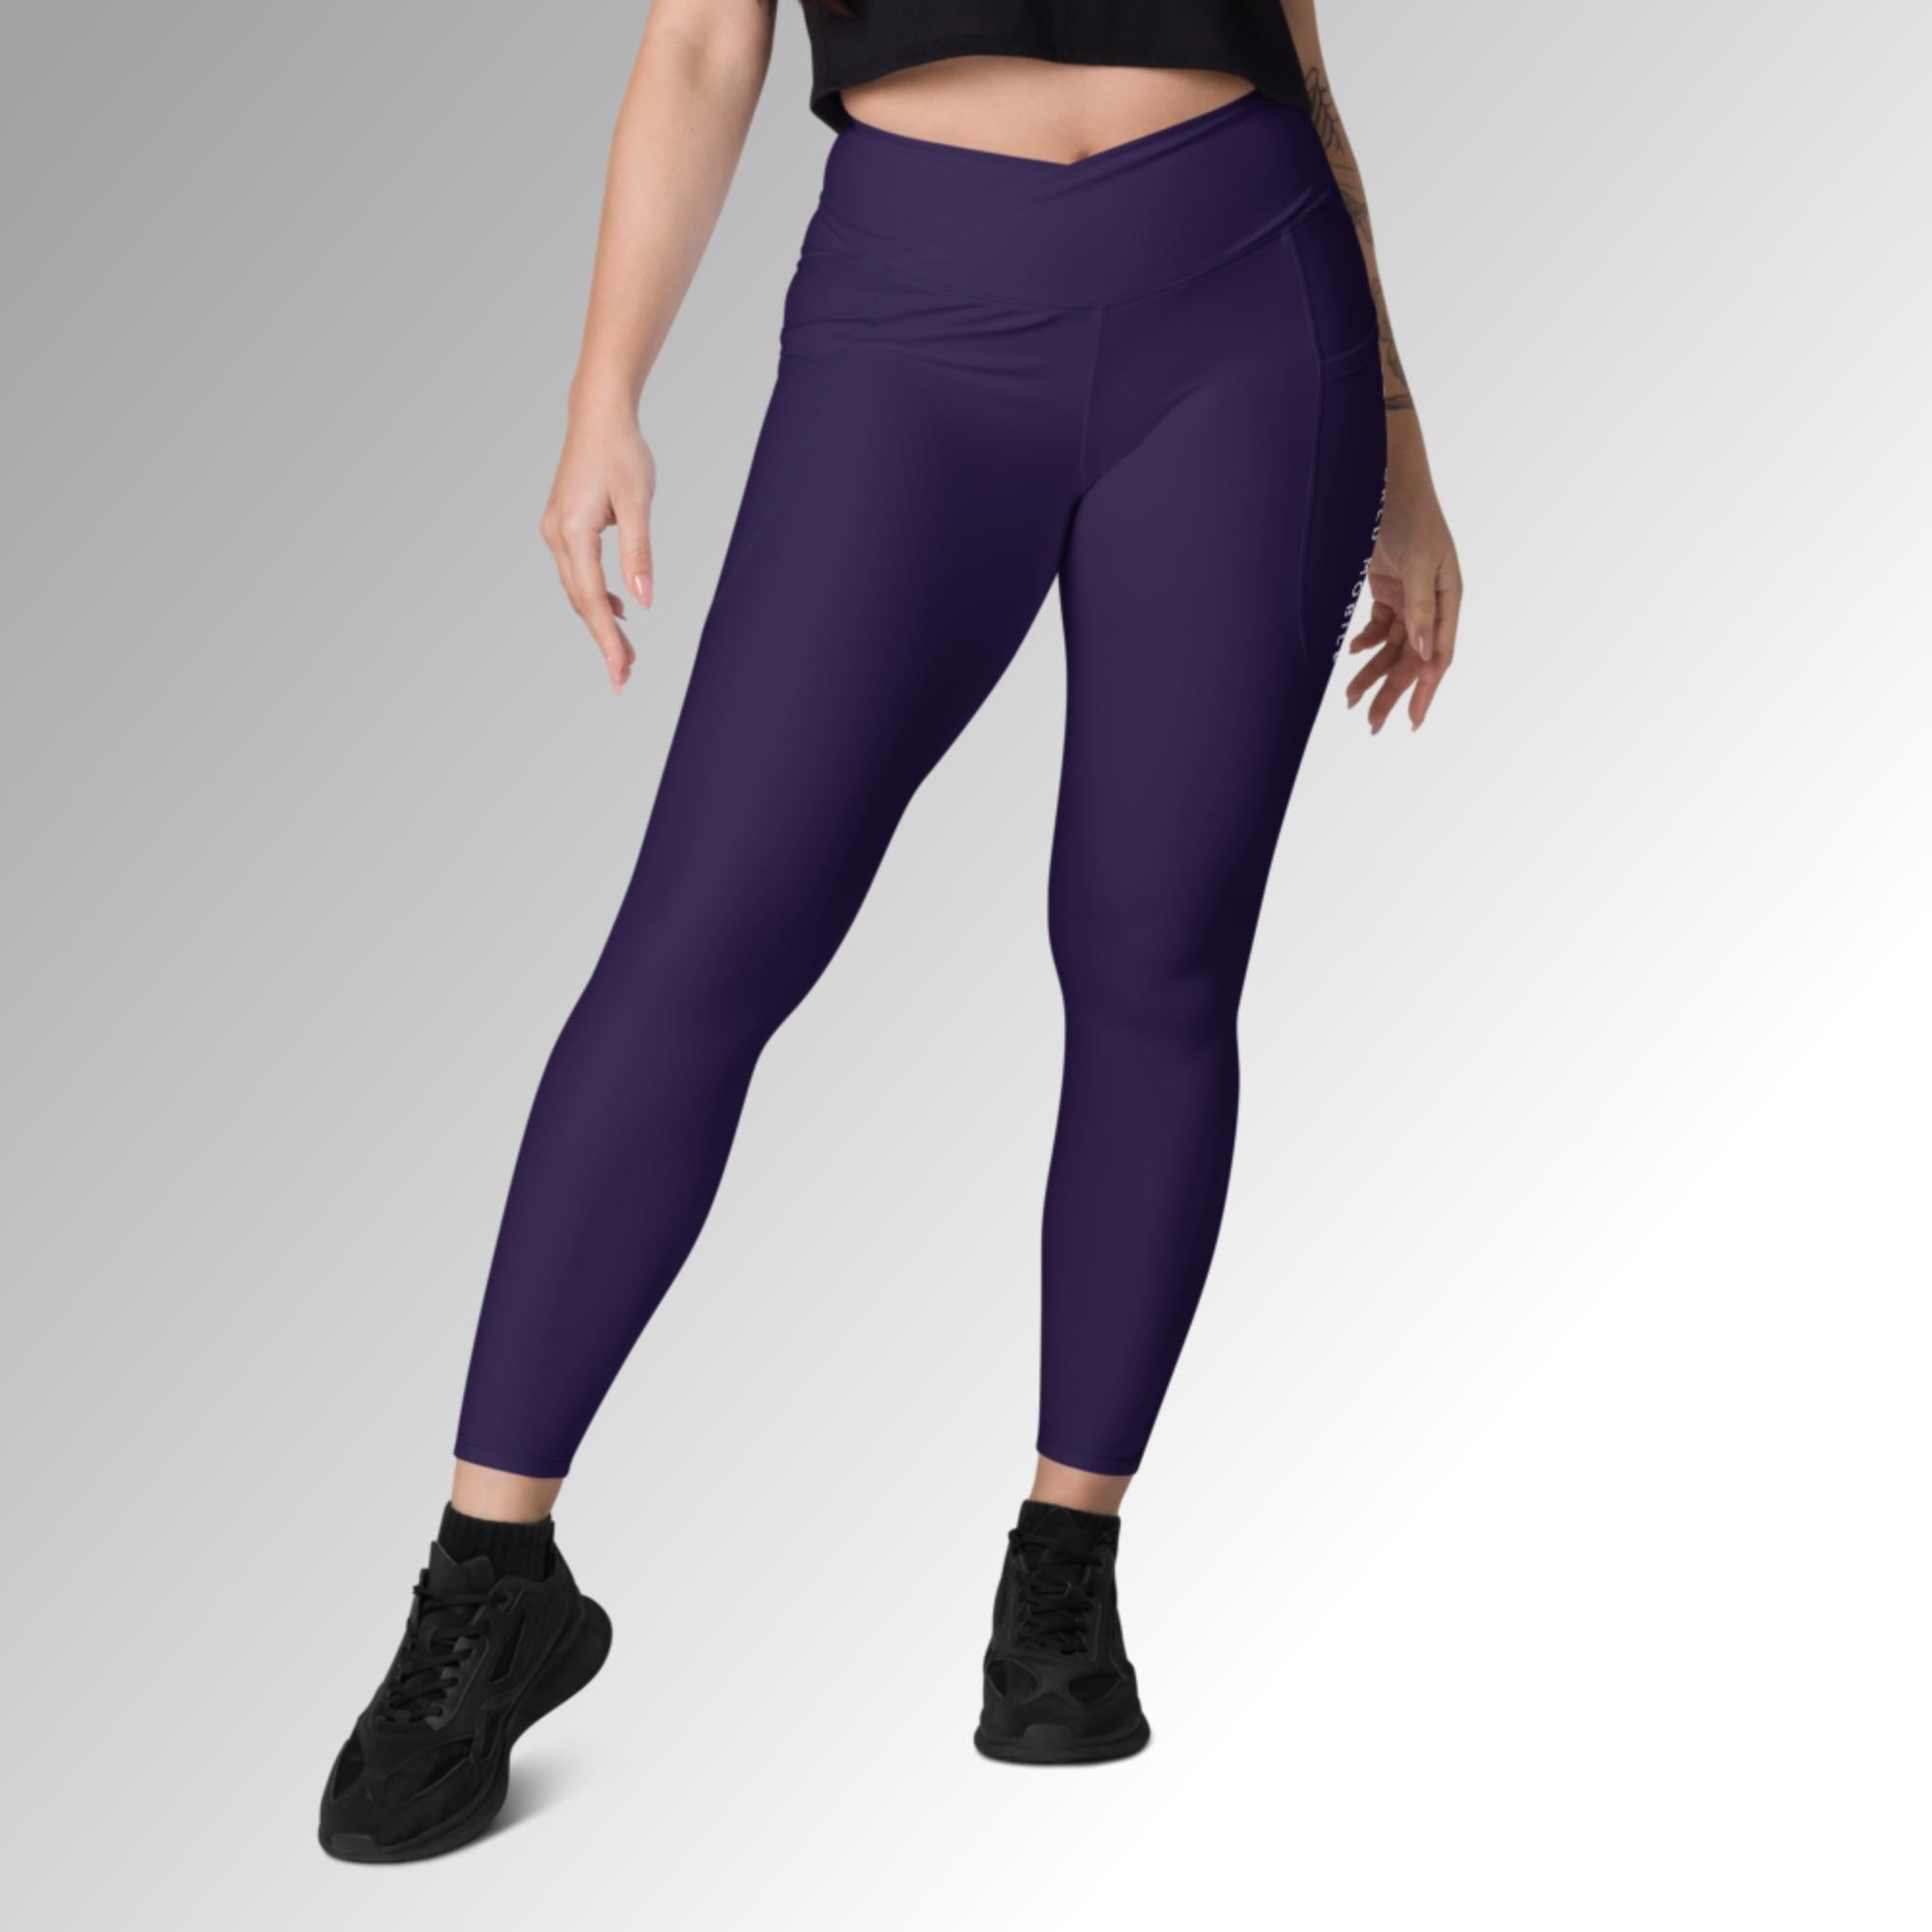 WM Crossover Leggings With Pockets – World Mobile Merch